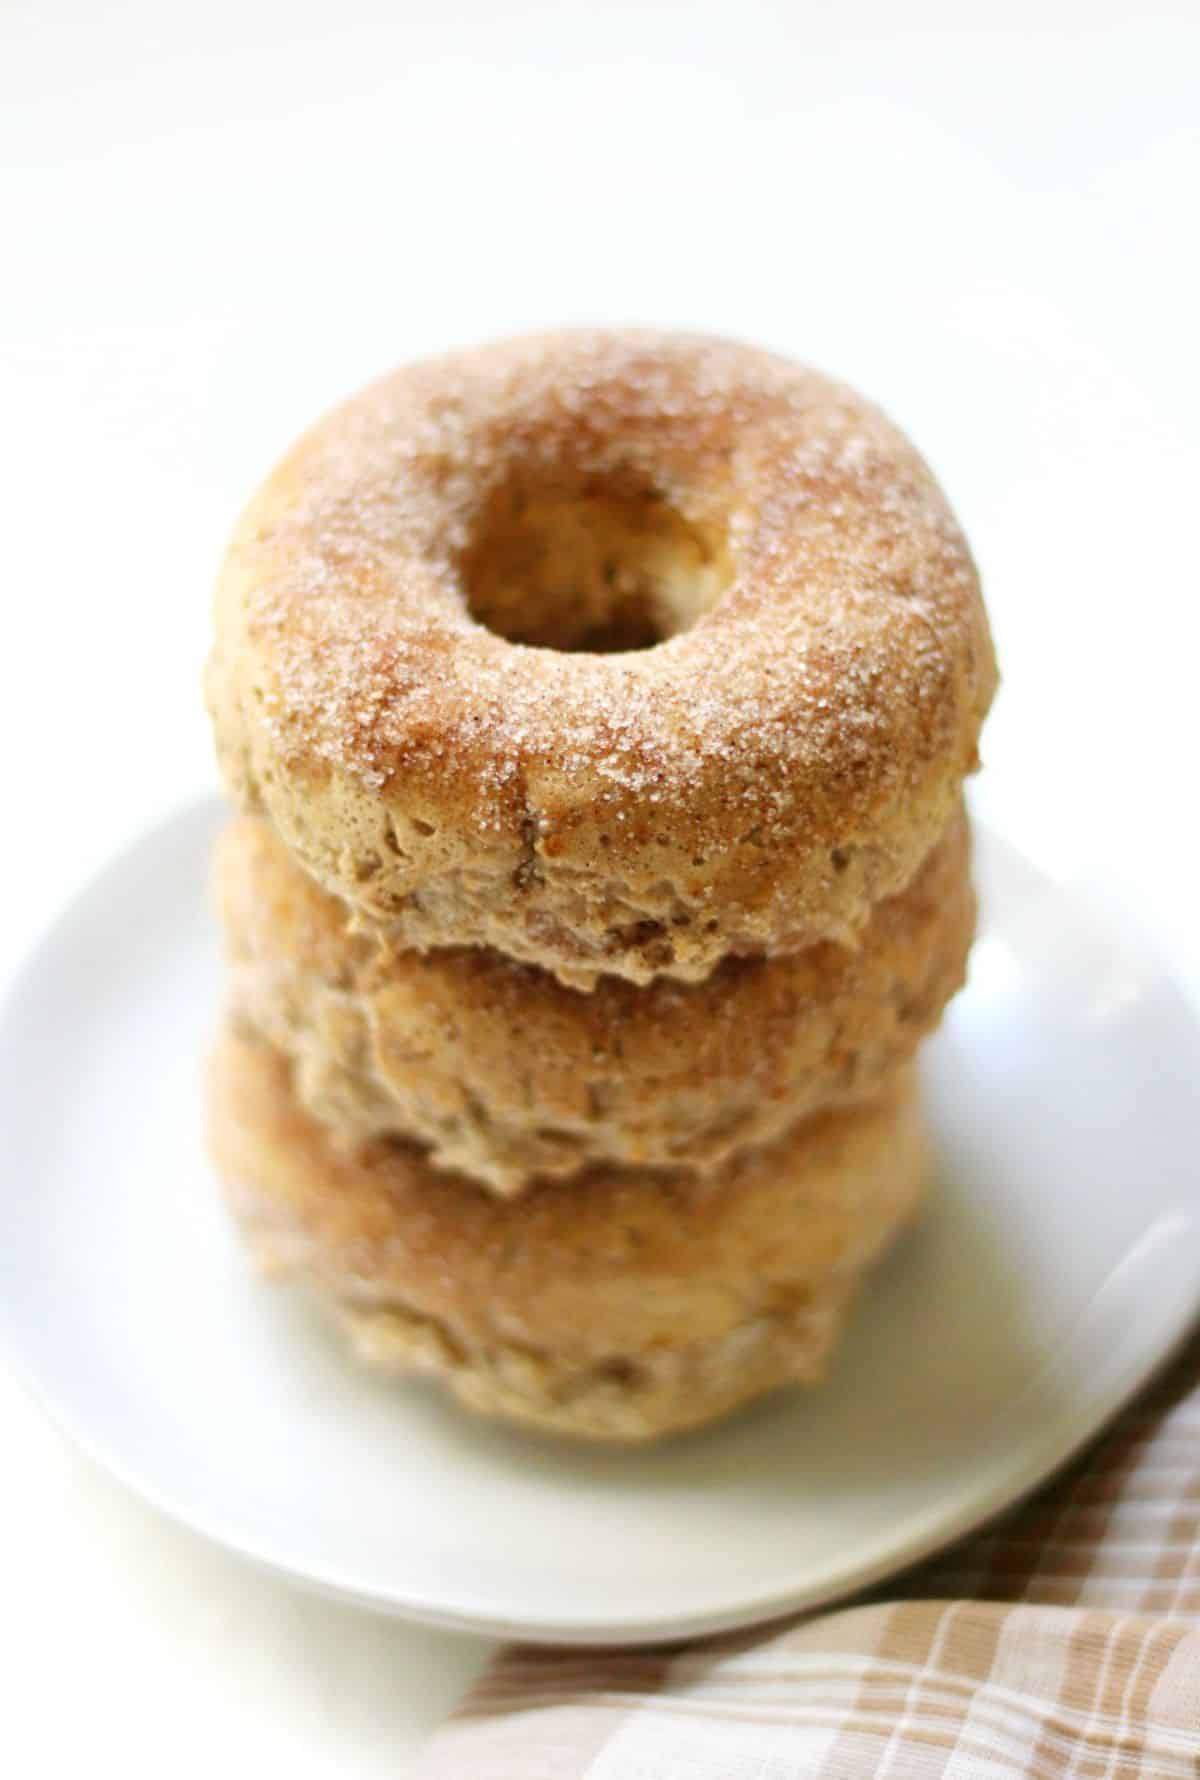 A pile of Baked Gluten-Free Apple Cider Doughnuts on a white plate.